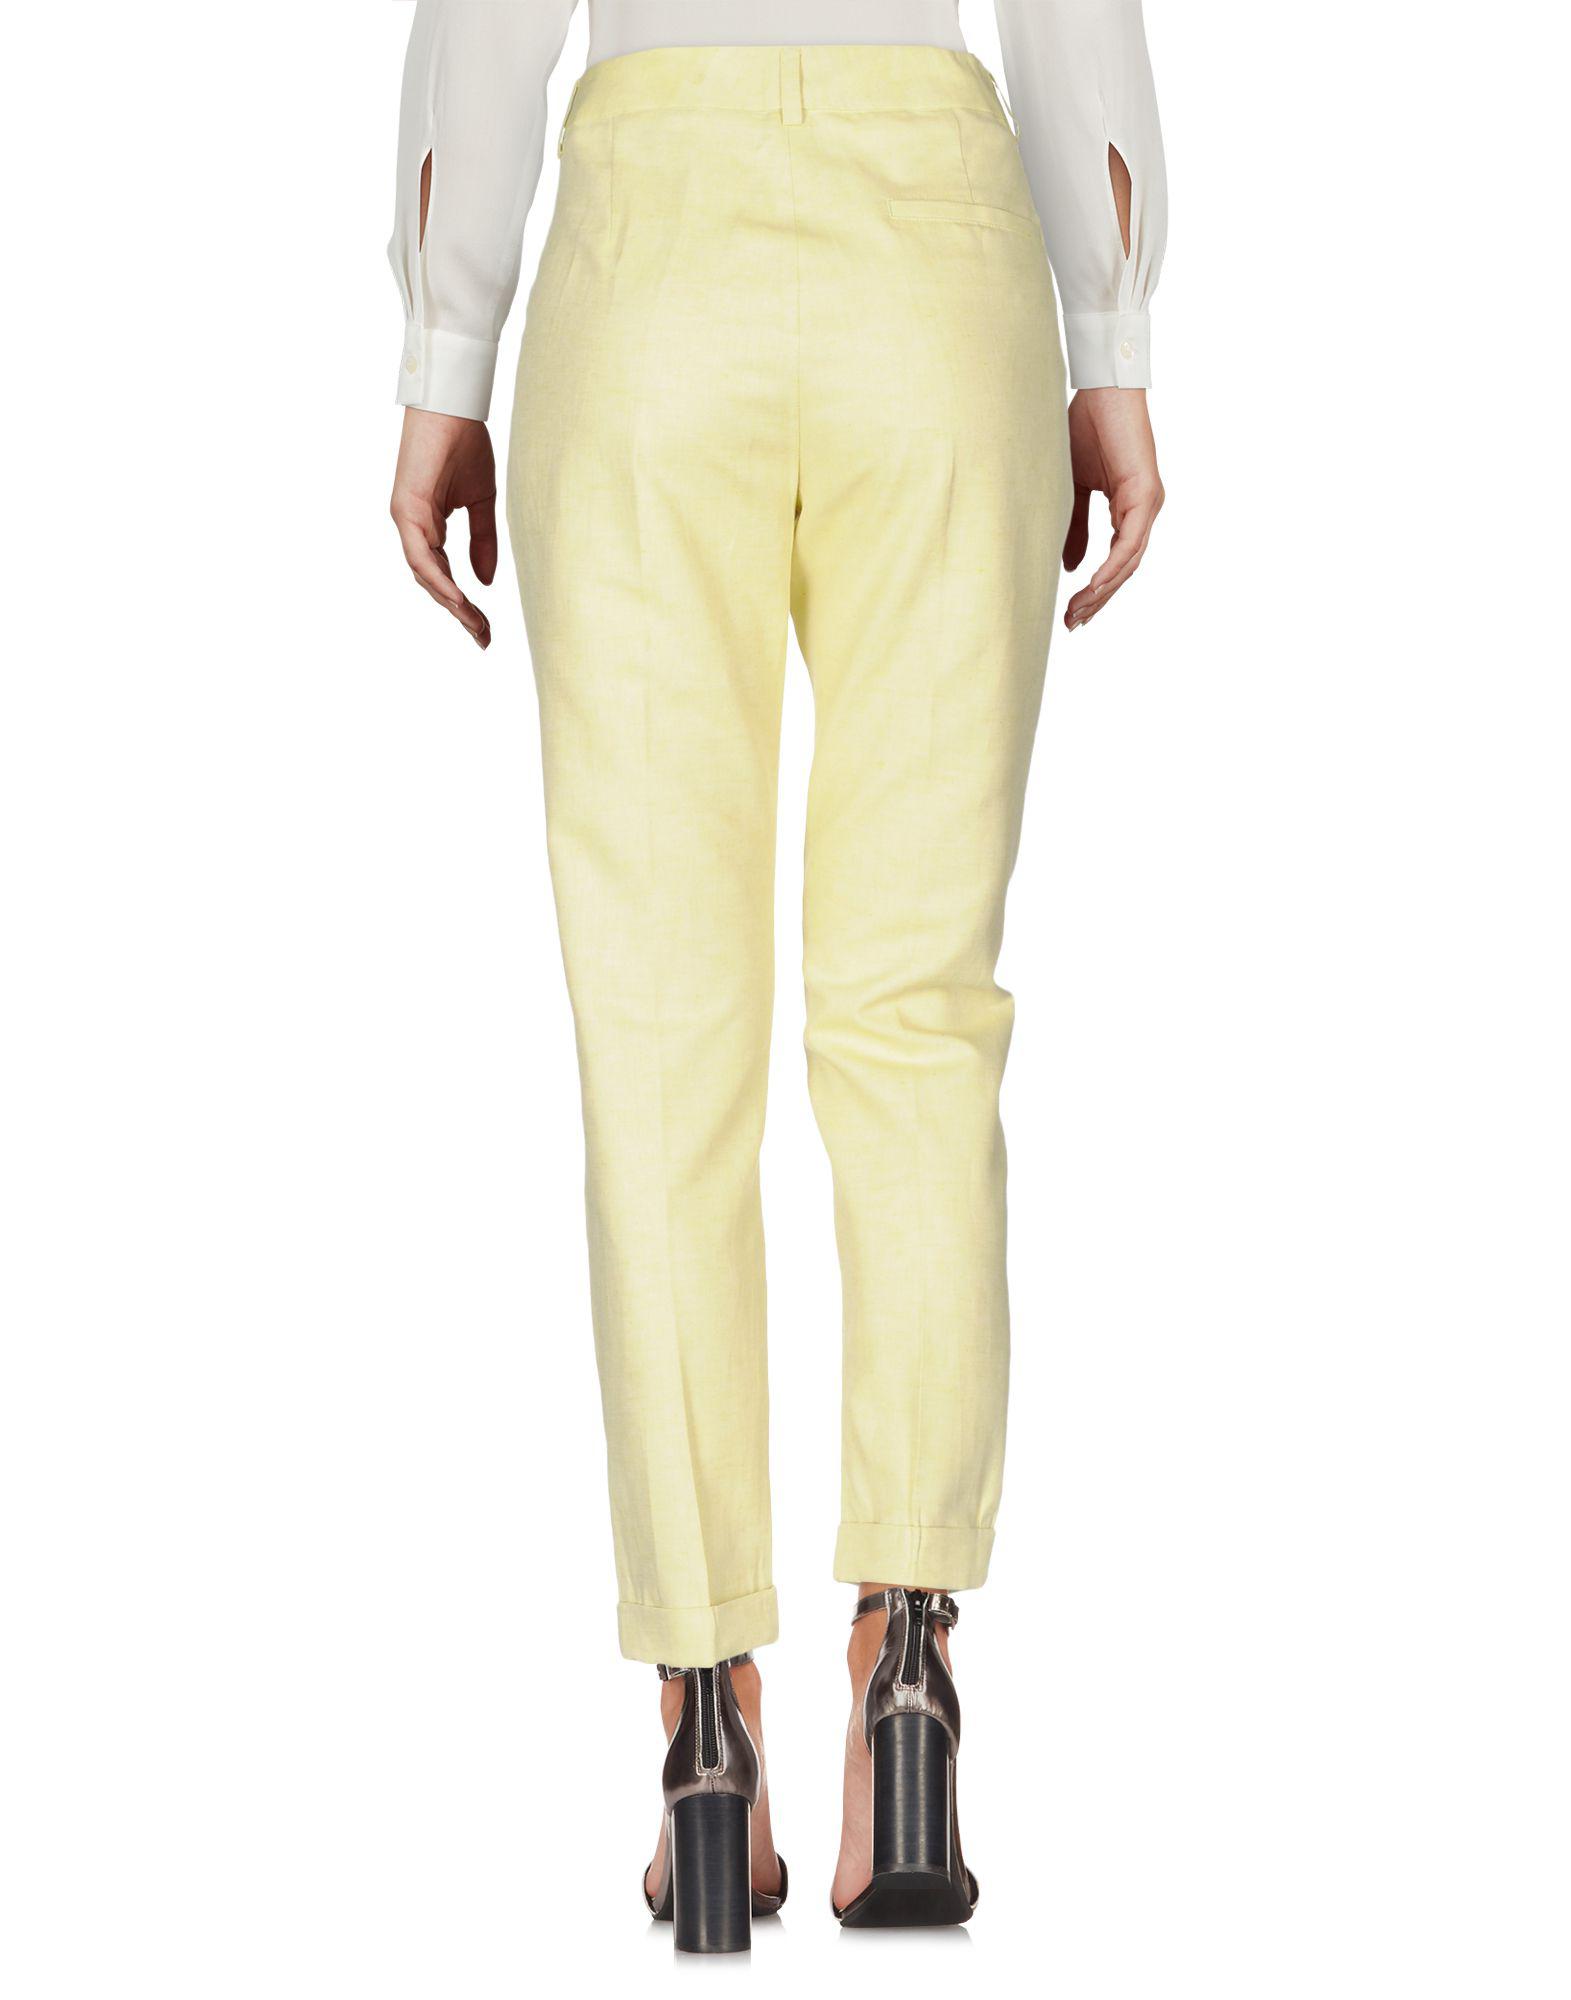 Momoní Cotton Casual Pants in Light Yellow (Yellow) - Lyst